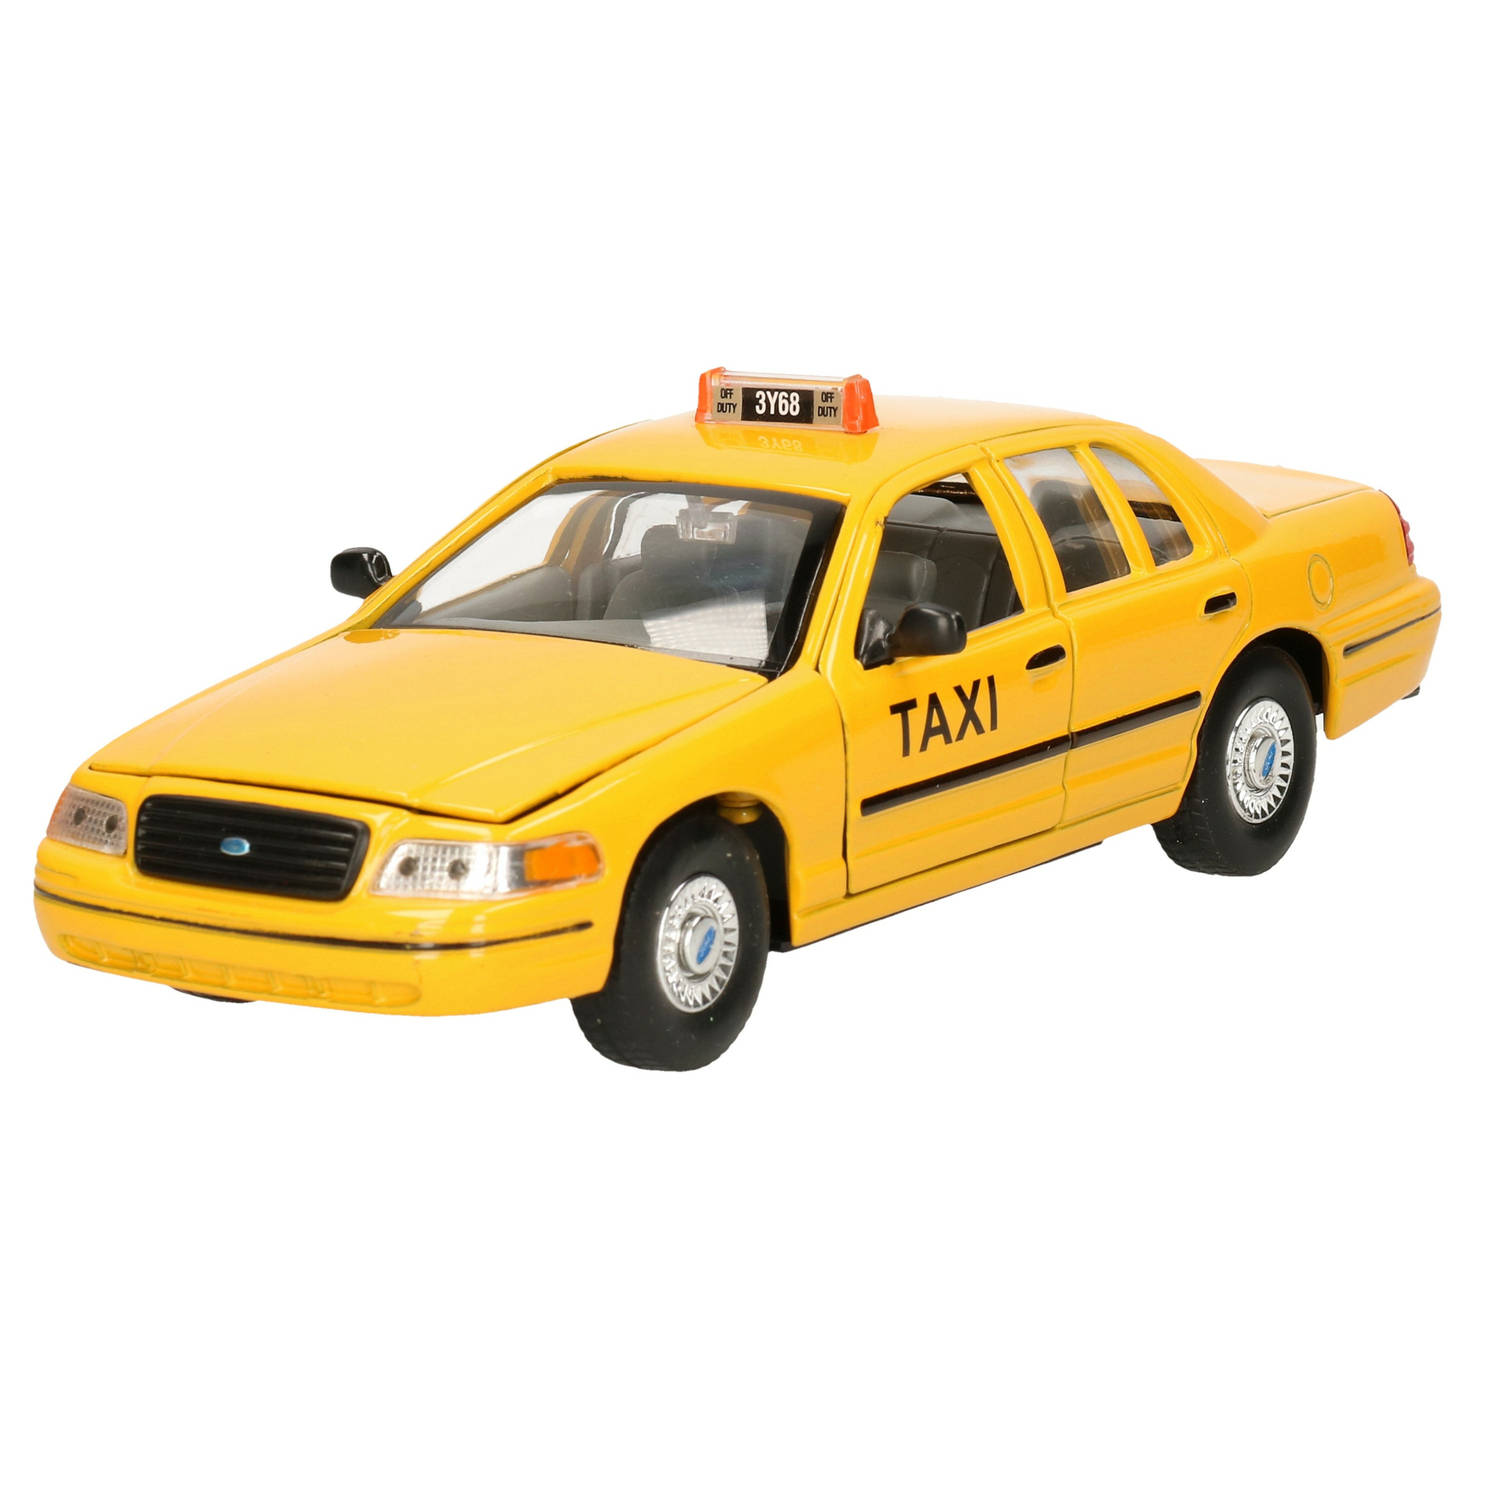 Welly Modelauto - Ford Crown Victoria taxi 1999 - geel - 22 x 8 x 6 cm